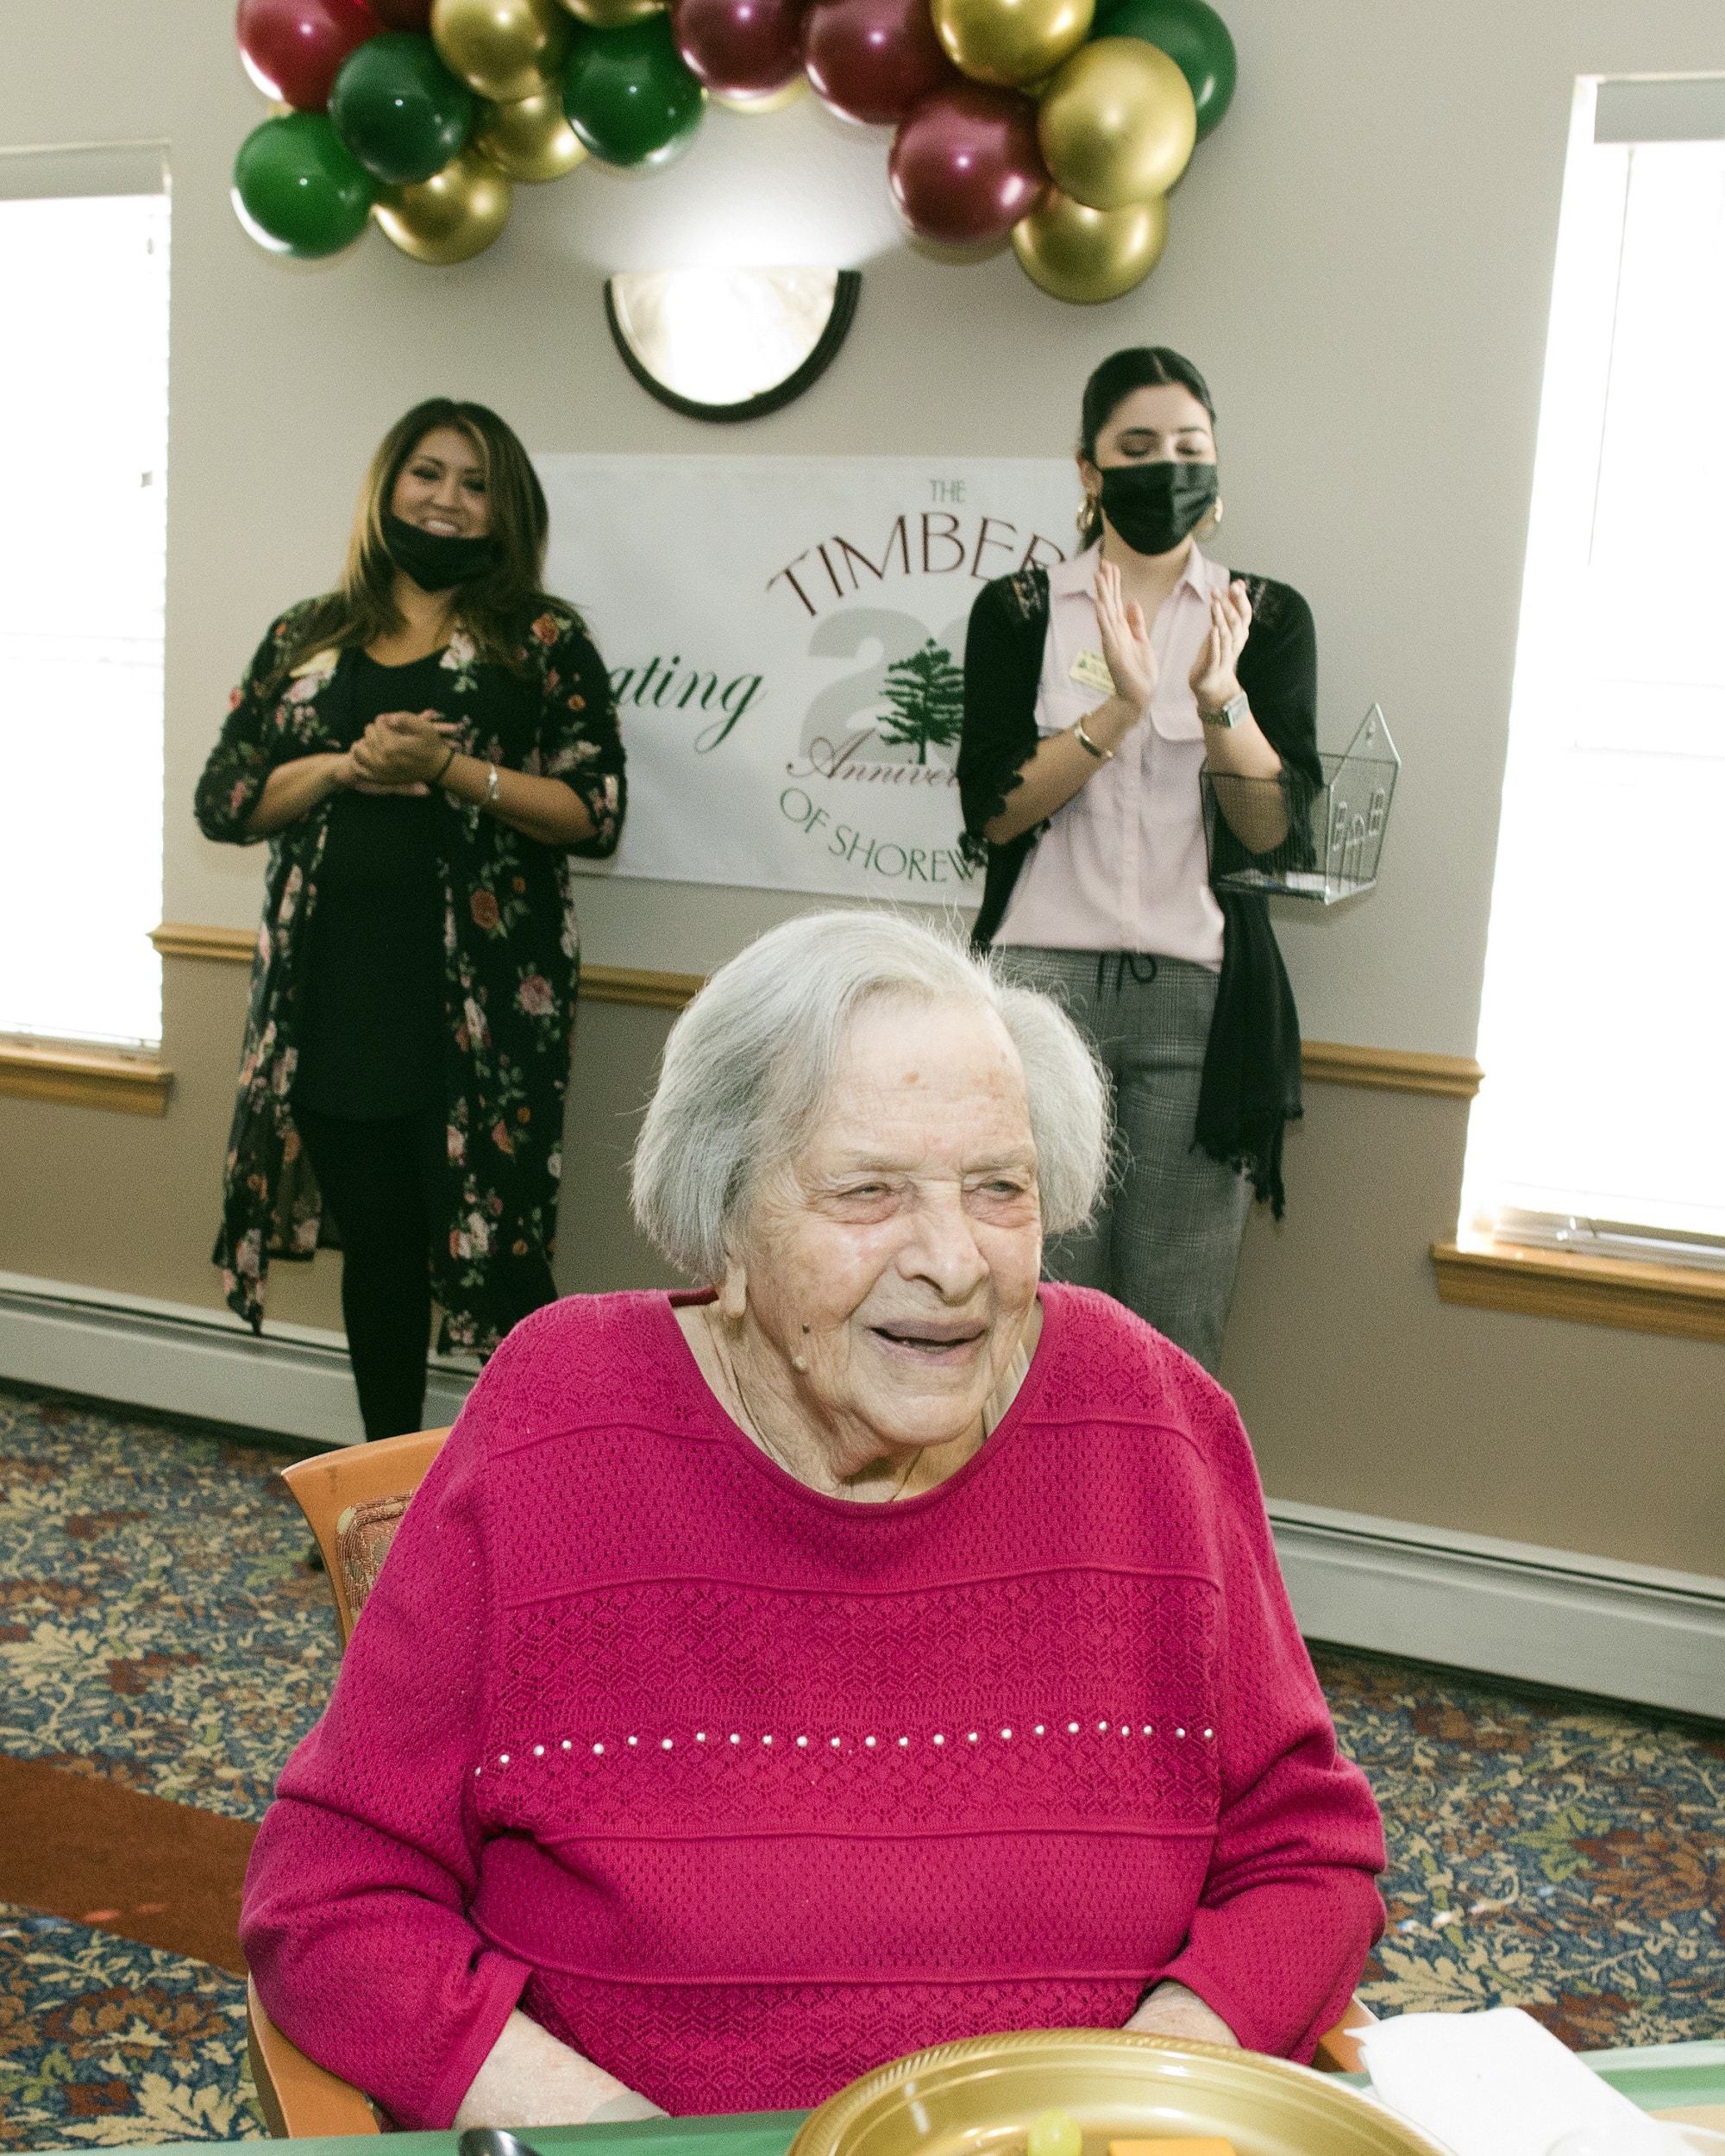 Timber resident Jean Thuringer during Timbers of Shorewood 20th Anniversary.